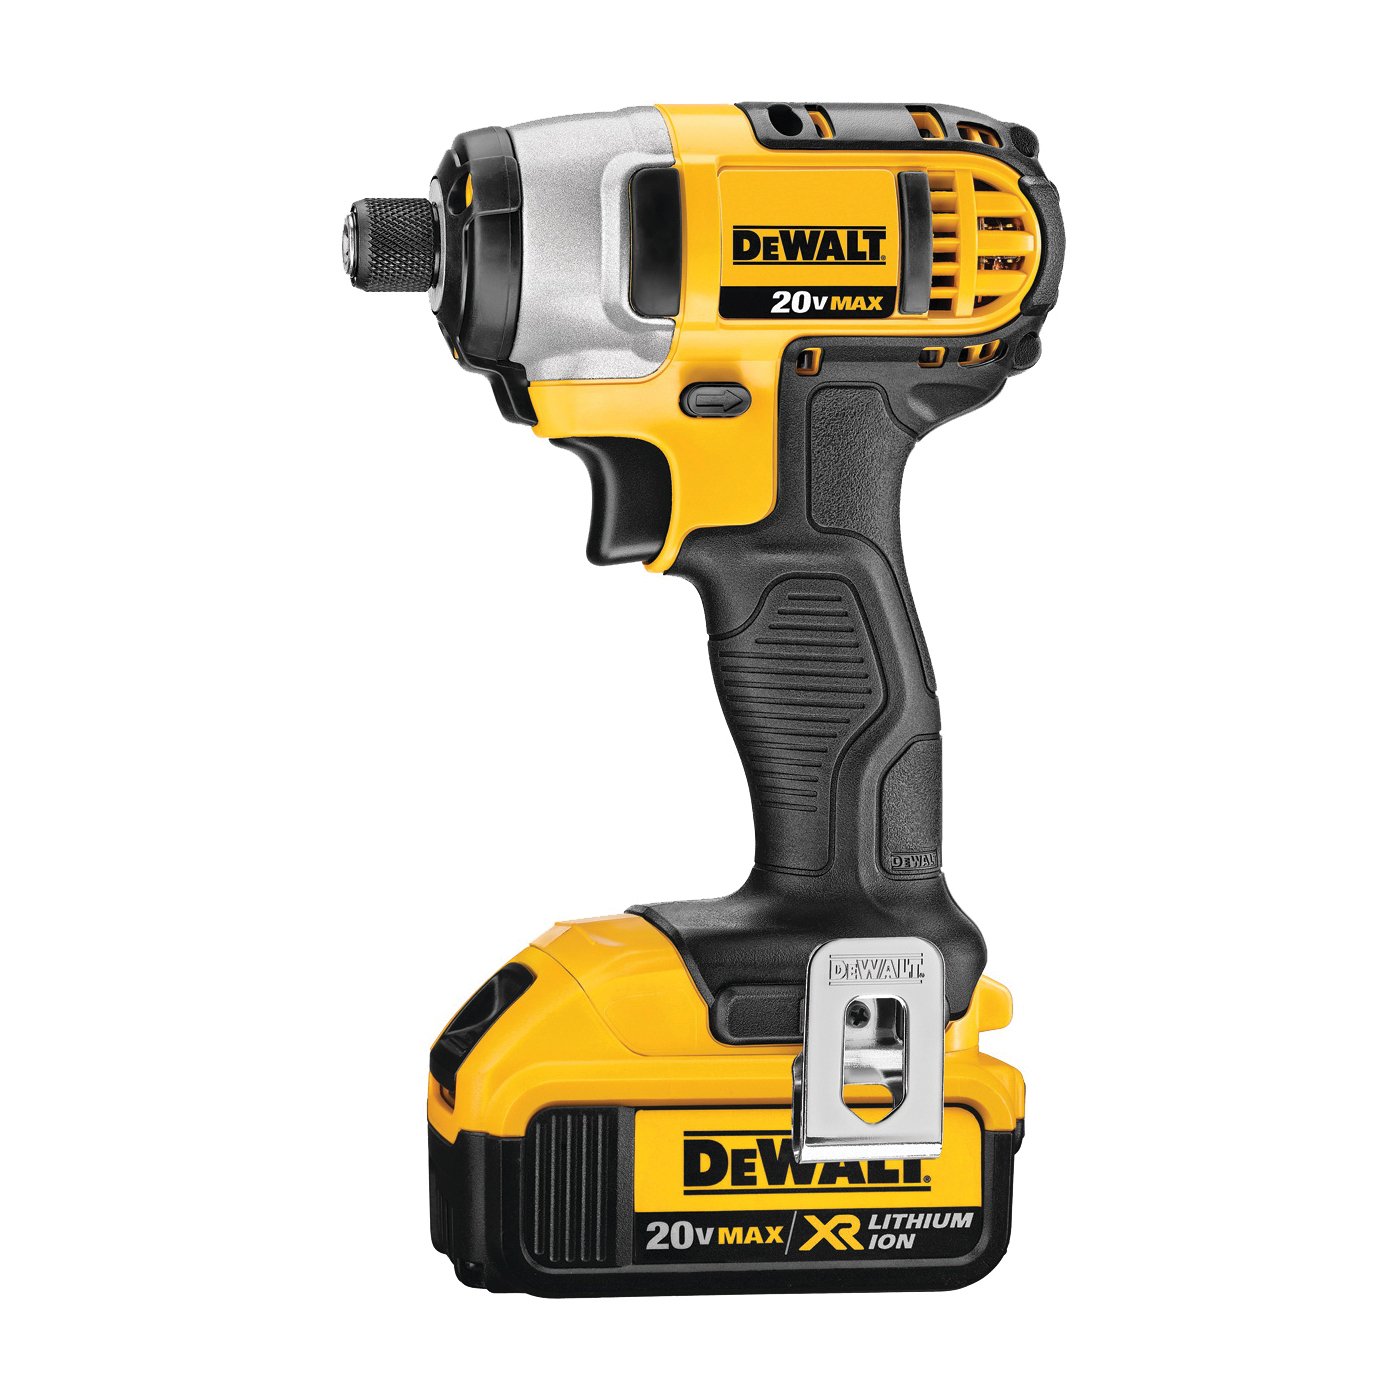 DCF885M2 Impact Driver Kit, Battery Included, 20 V, 4 Ah, 1/4 in Drive, Hex Drive, 3200 ipm